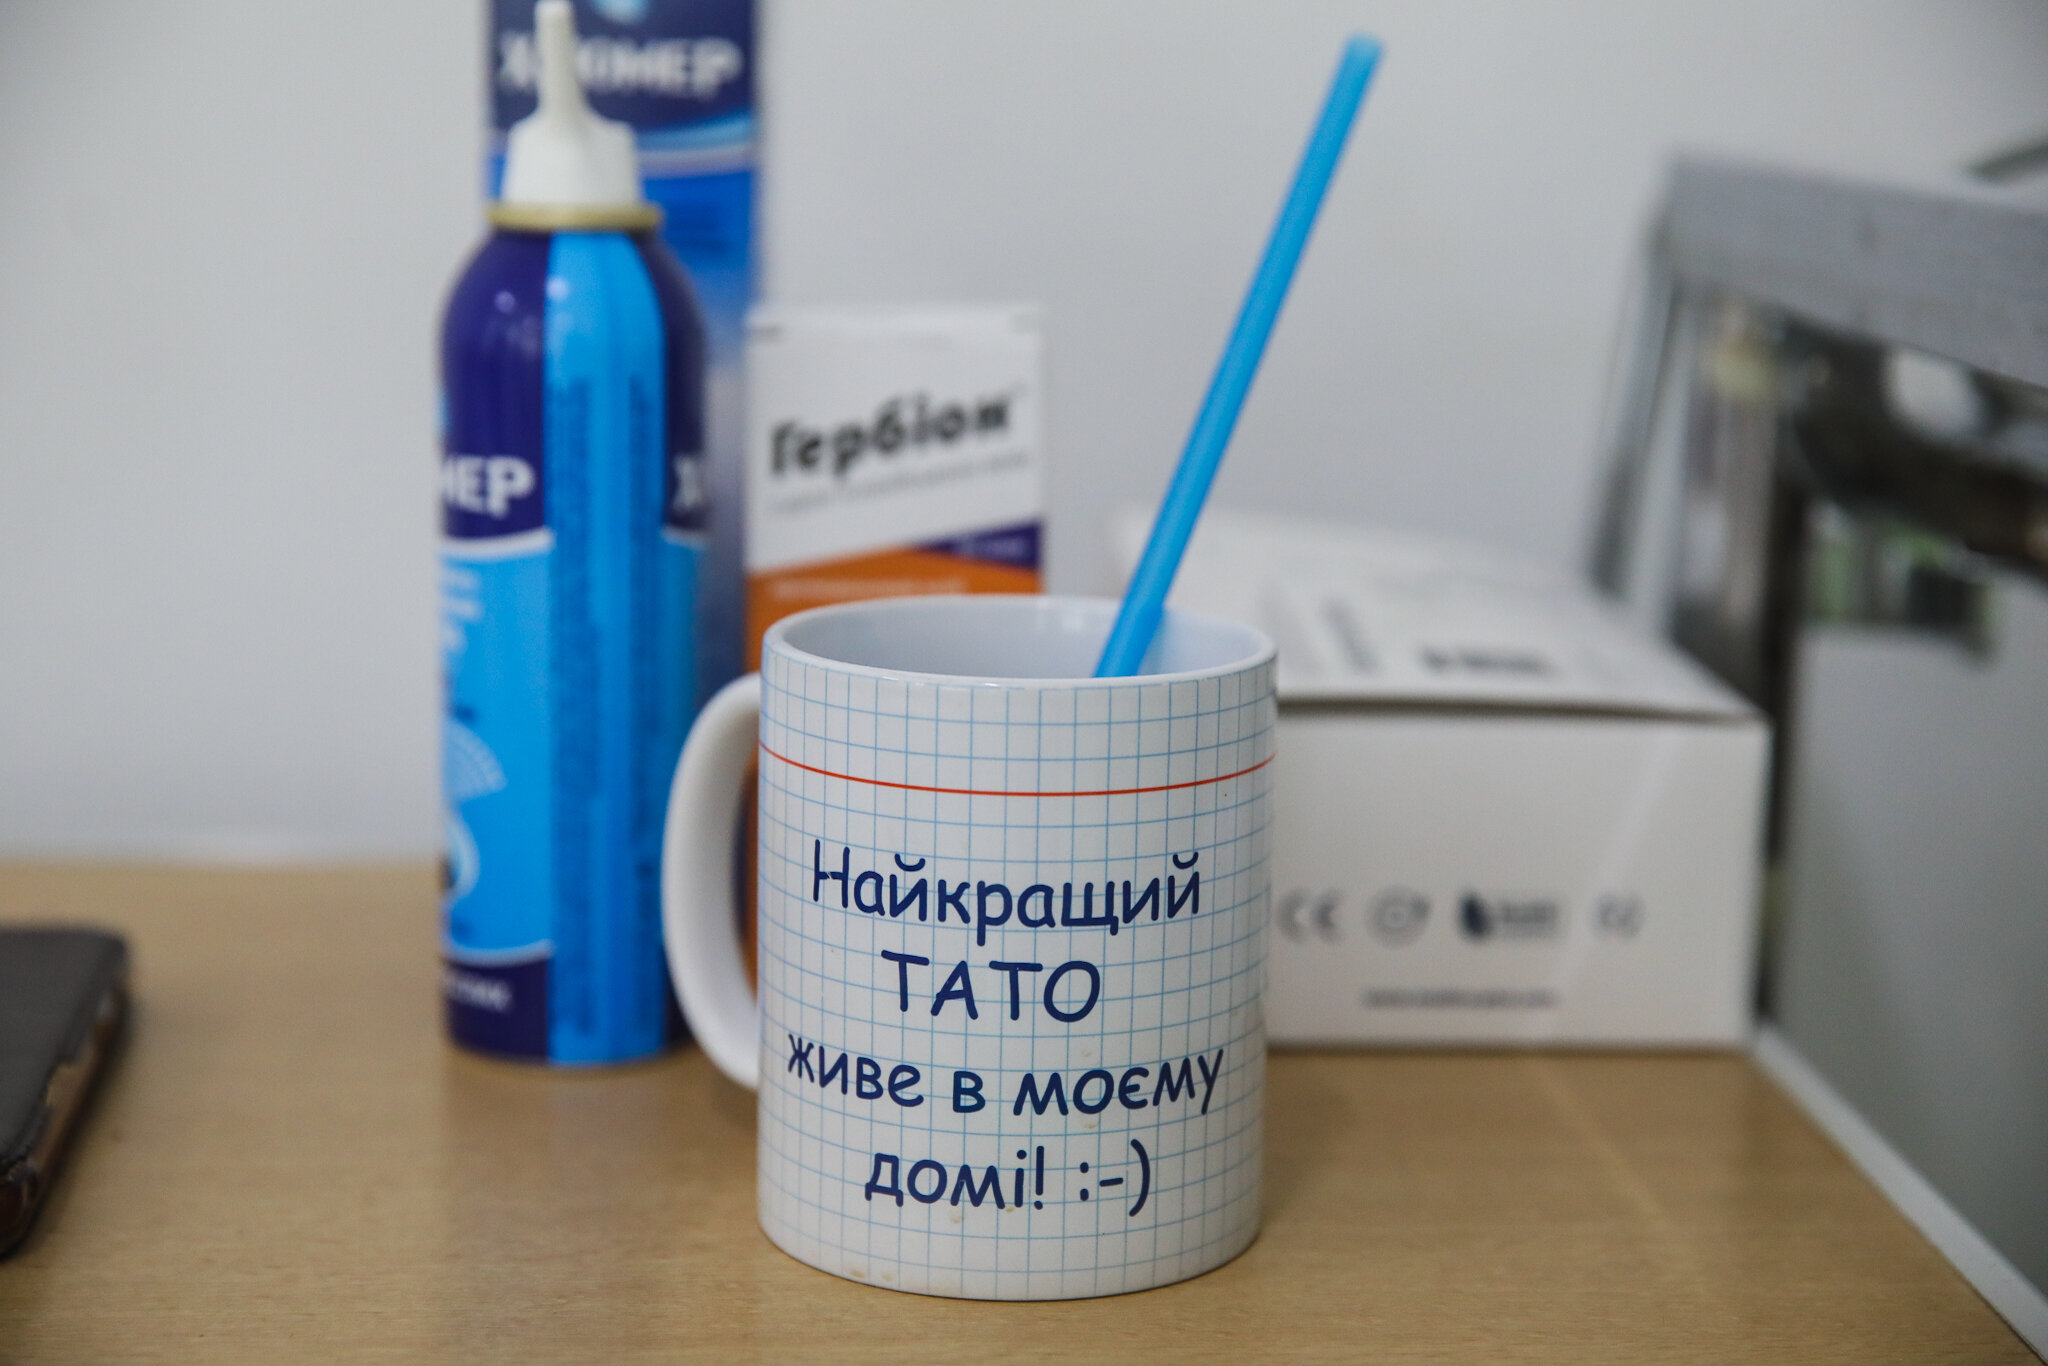 A mug labeled “The Best Dad” sits on the table next to Taras Biyovsky, a coronavirus patient in intensive care unit at Kolomyia District Hospital in Ivano-Frankivsk Oblast on March 16, 2021. Biyovskiy has five children.